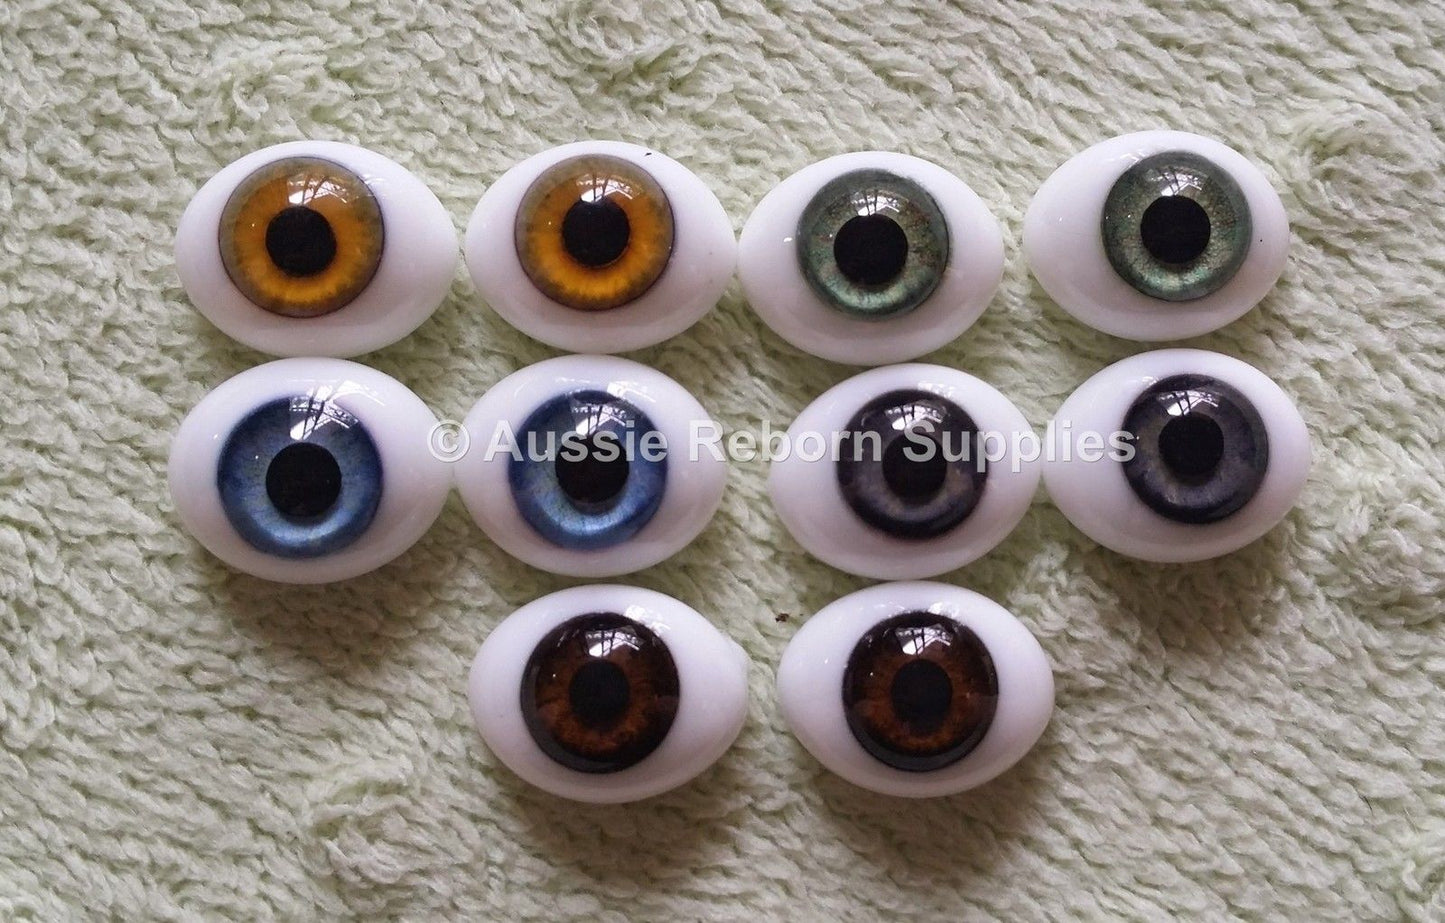 16mm Brown Oval Glass Eyes Reborn Baby Doll Making Supplies